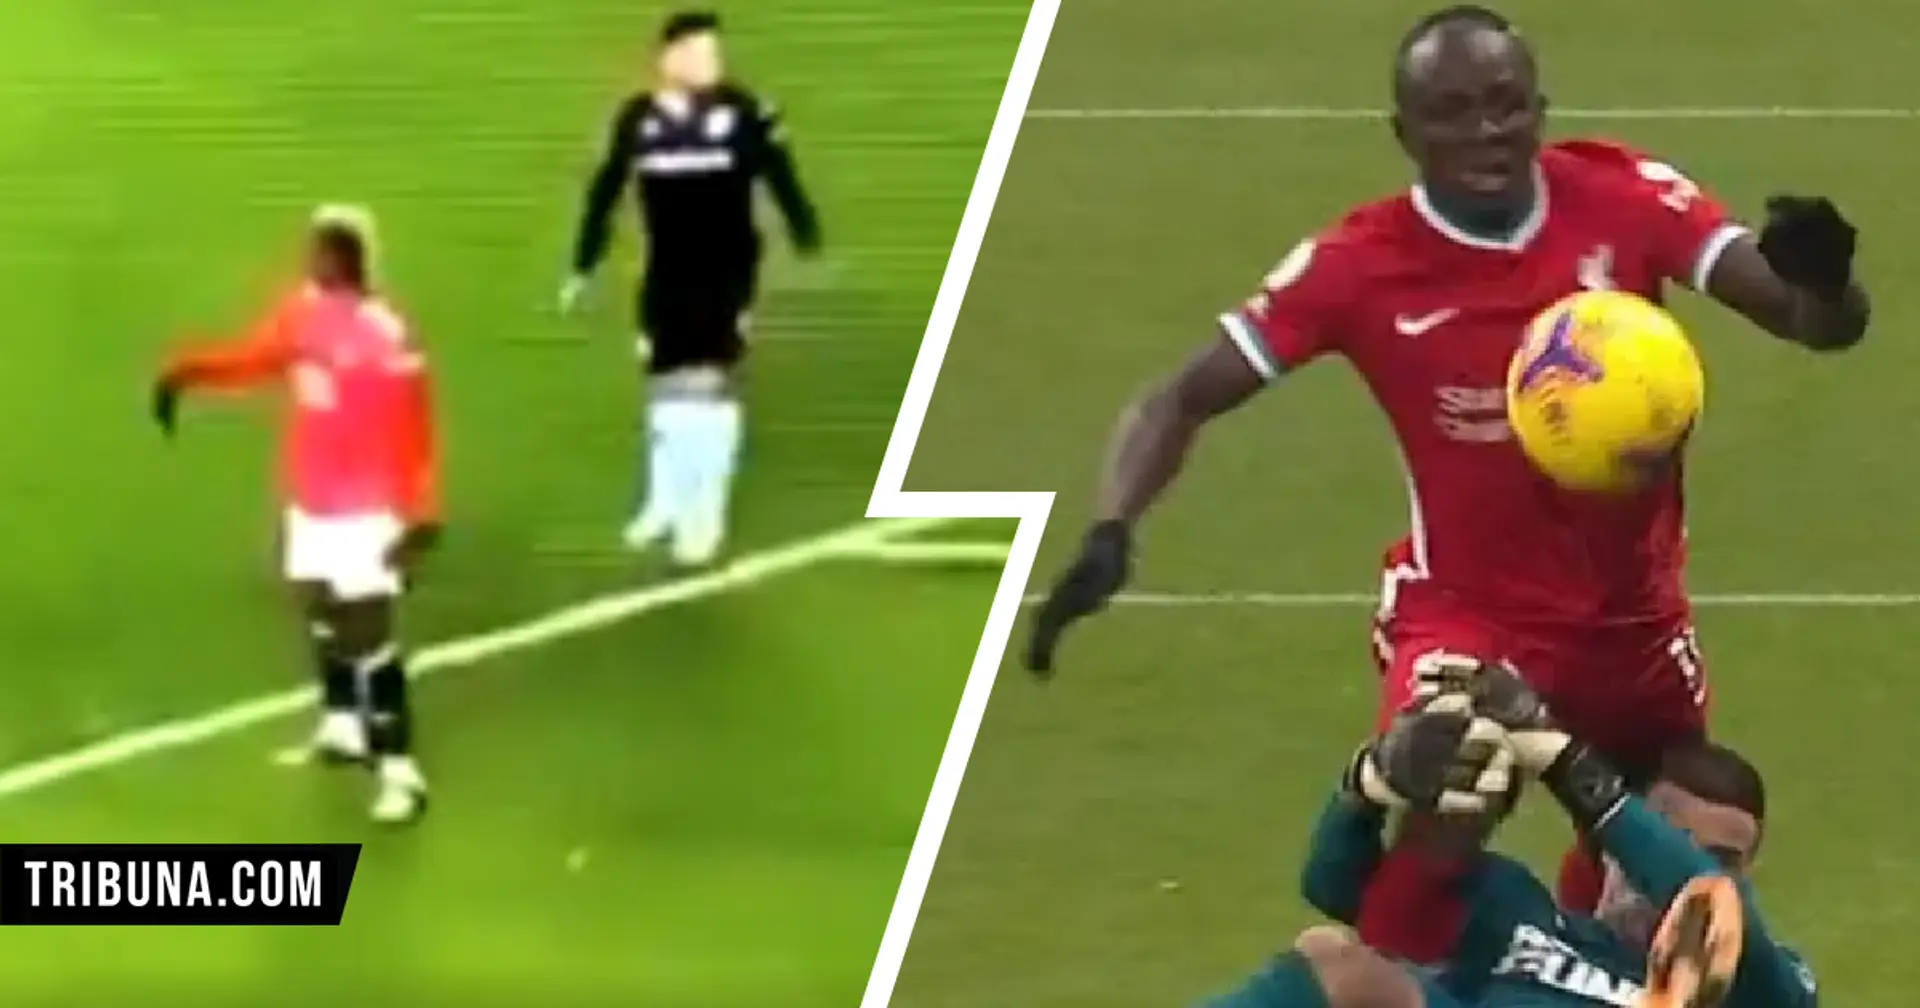 Pogba tells Shaw to dive while Mane stays on his feet: Difference in class showed in two episodes